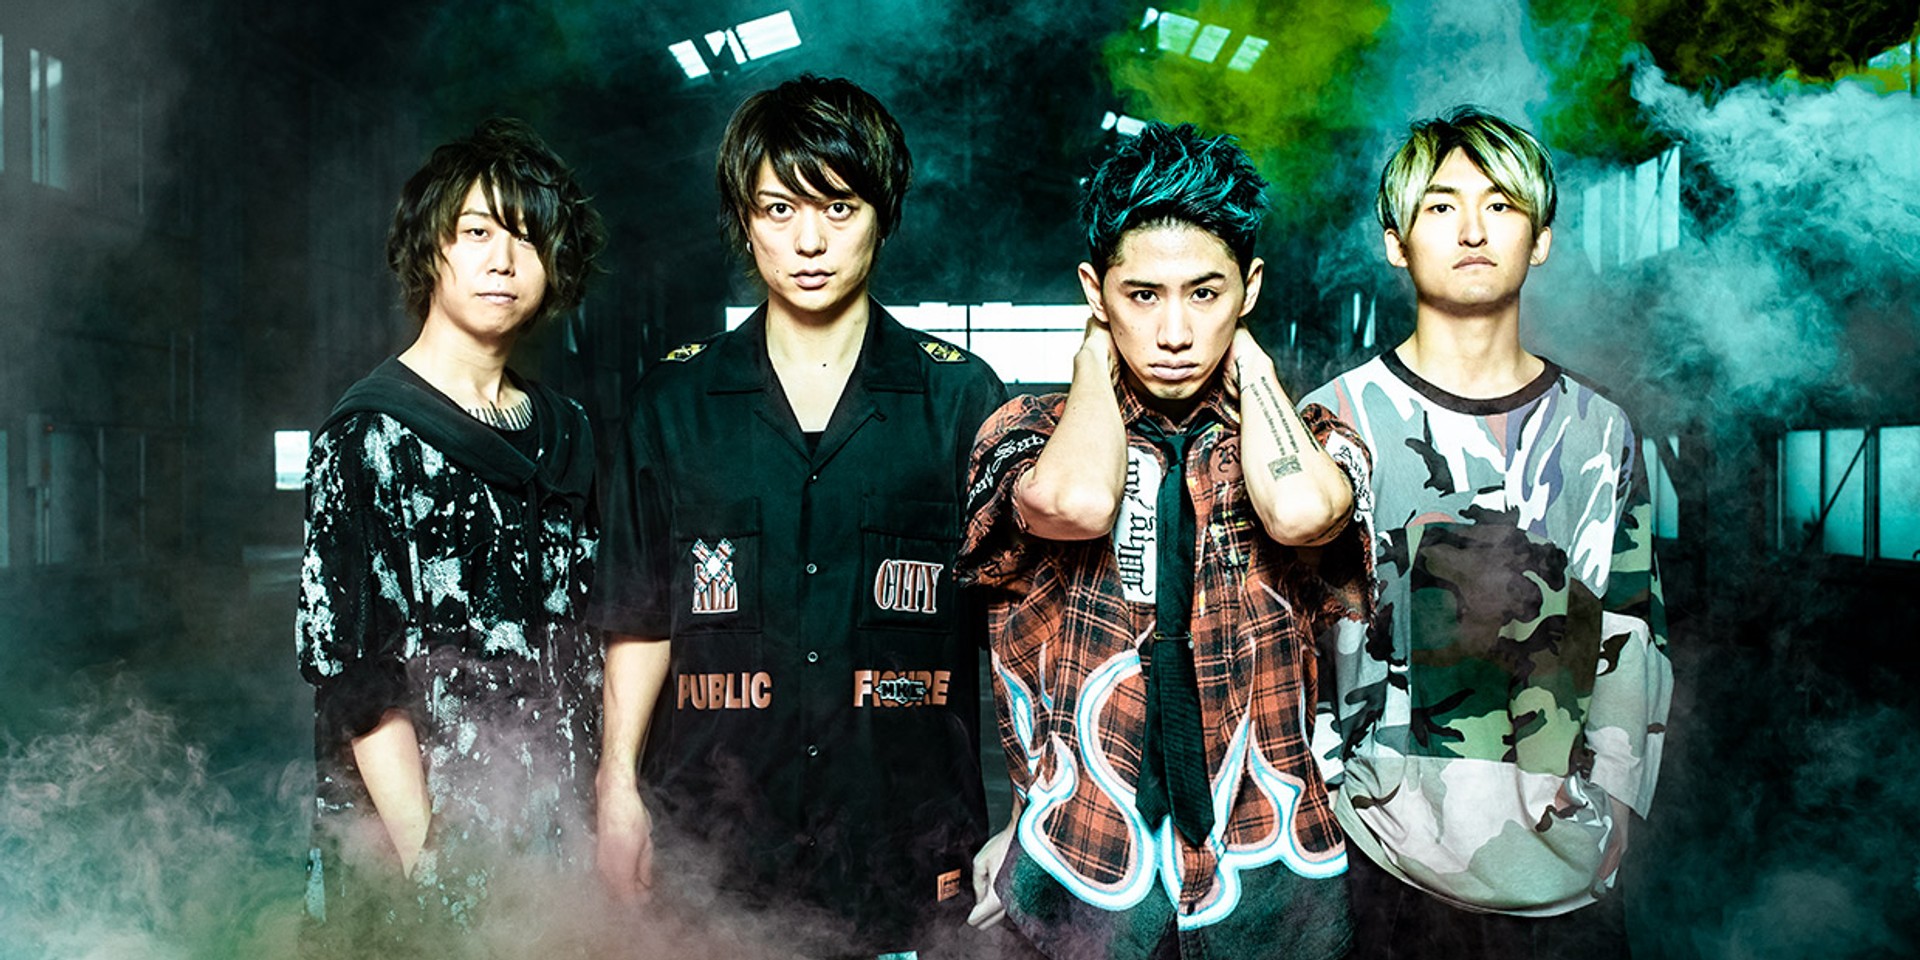 ONE OK ROCK announce Asia tour – Shows in Singapore, Manila, Jakarta, Taipei and more confirmed